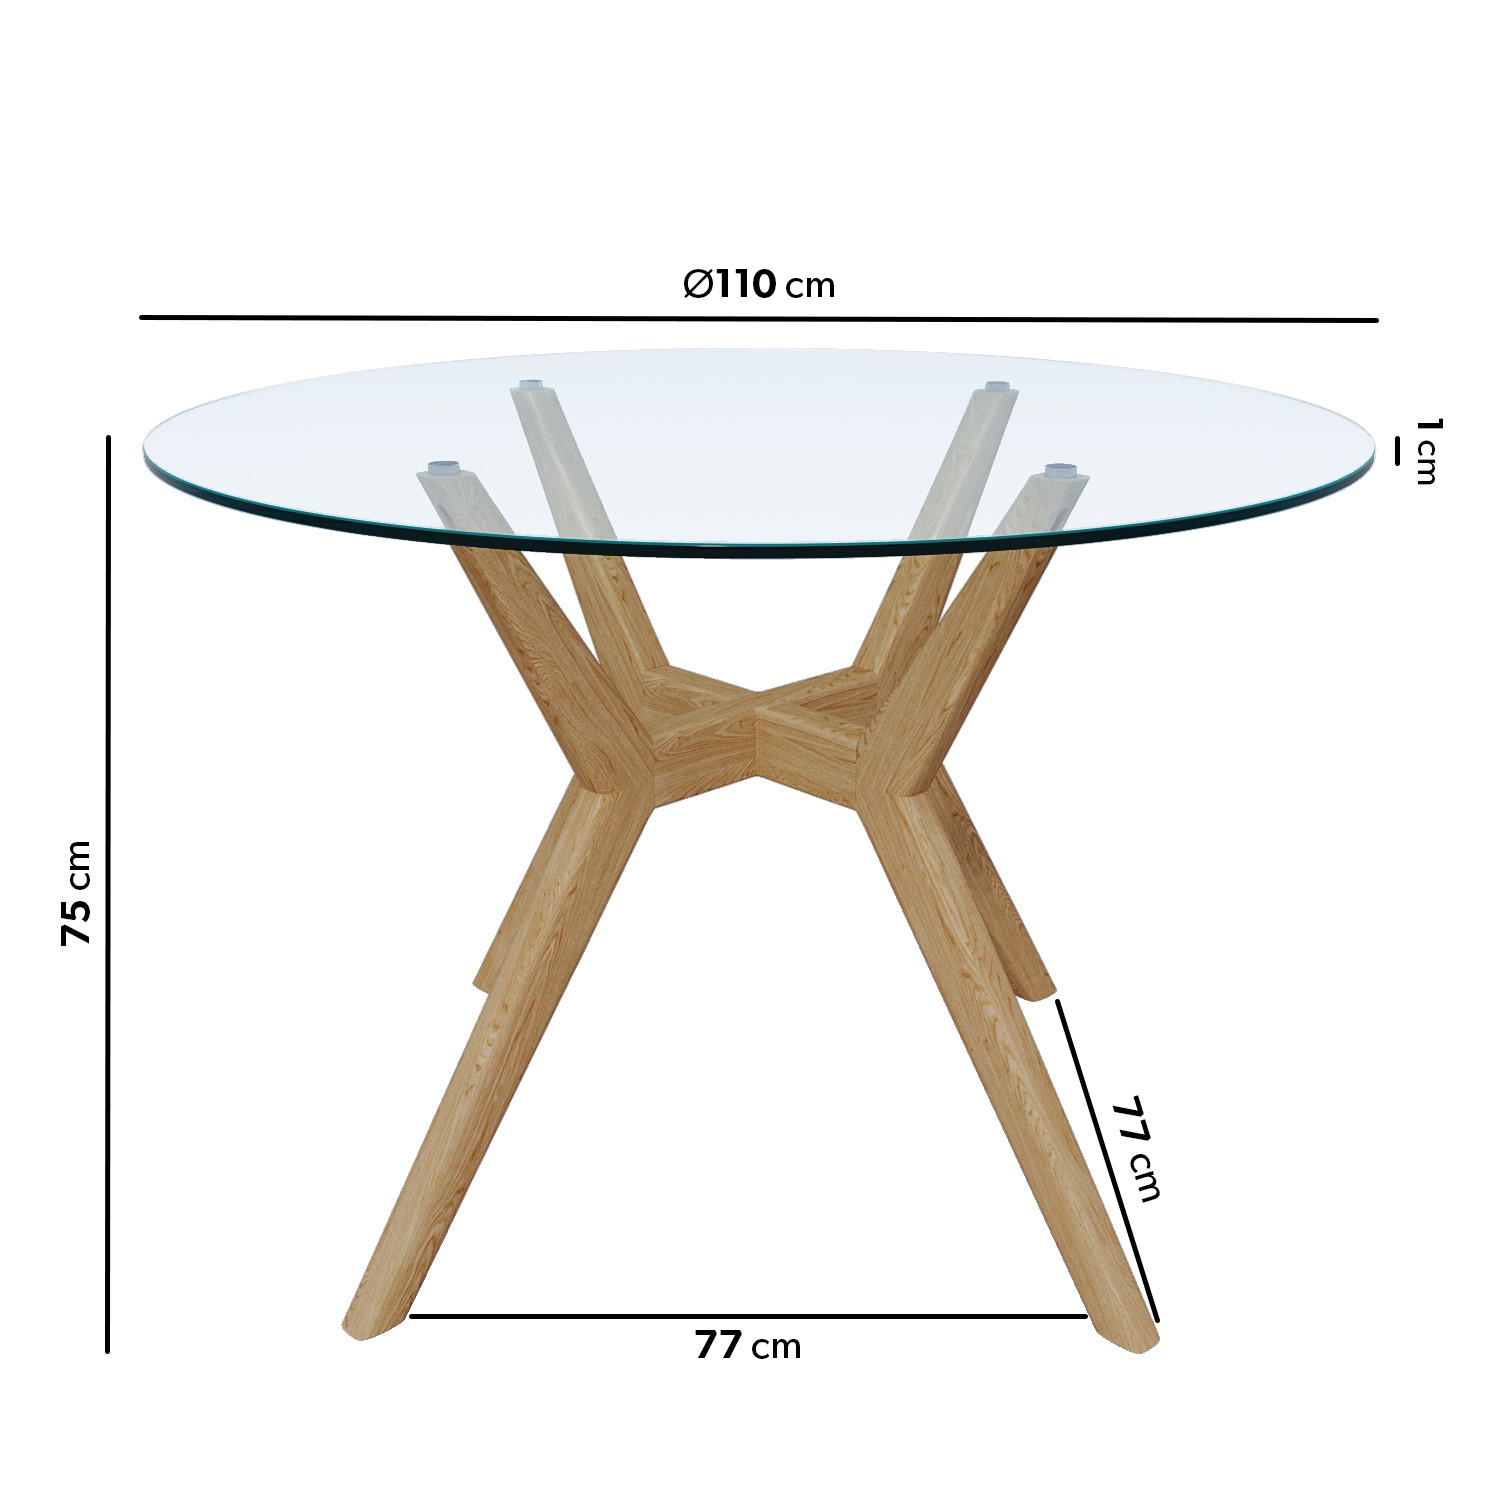 Read more about Large round glass top dining table with oak legs seats 4 nori